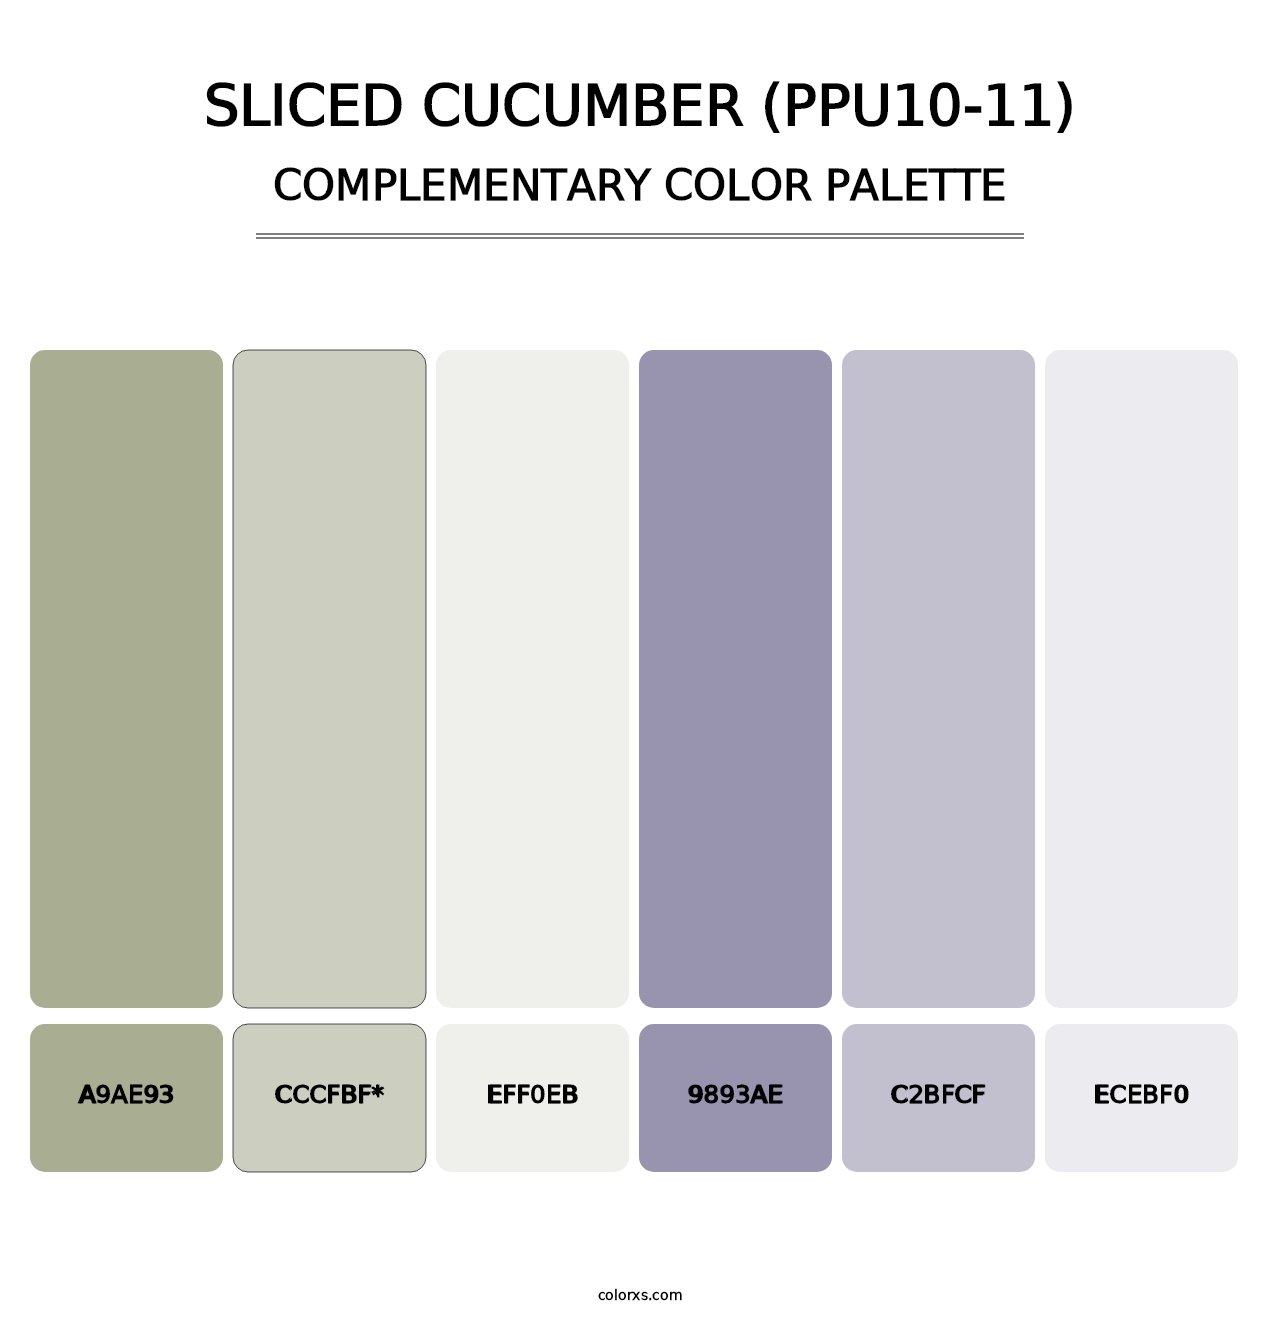 Sliced Cucumber (PPU10-11) - Complementary Color Palette